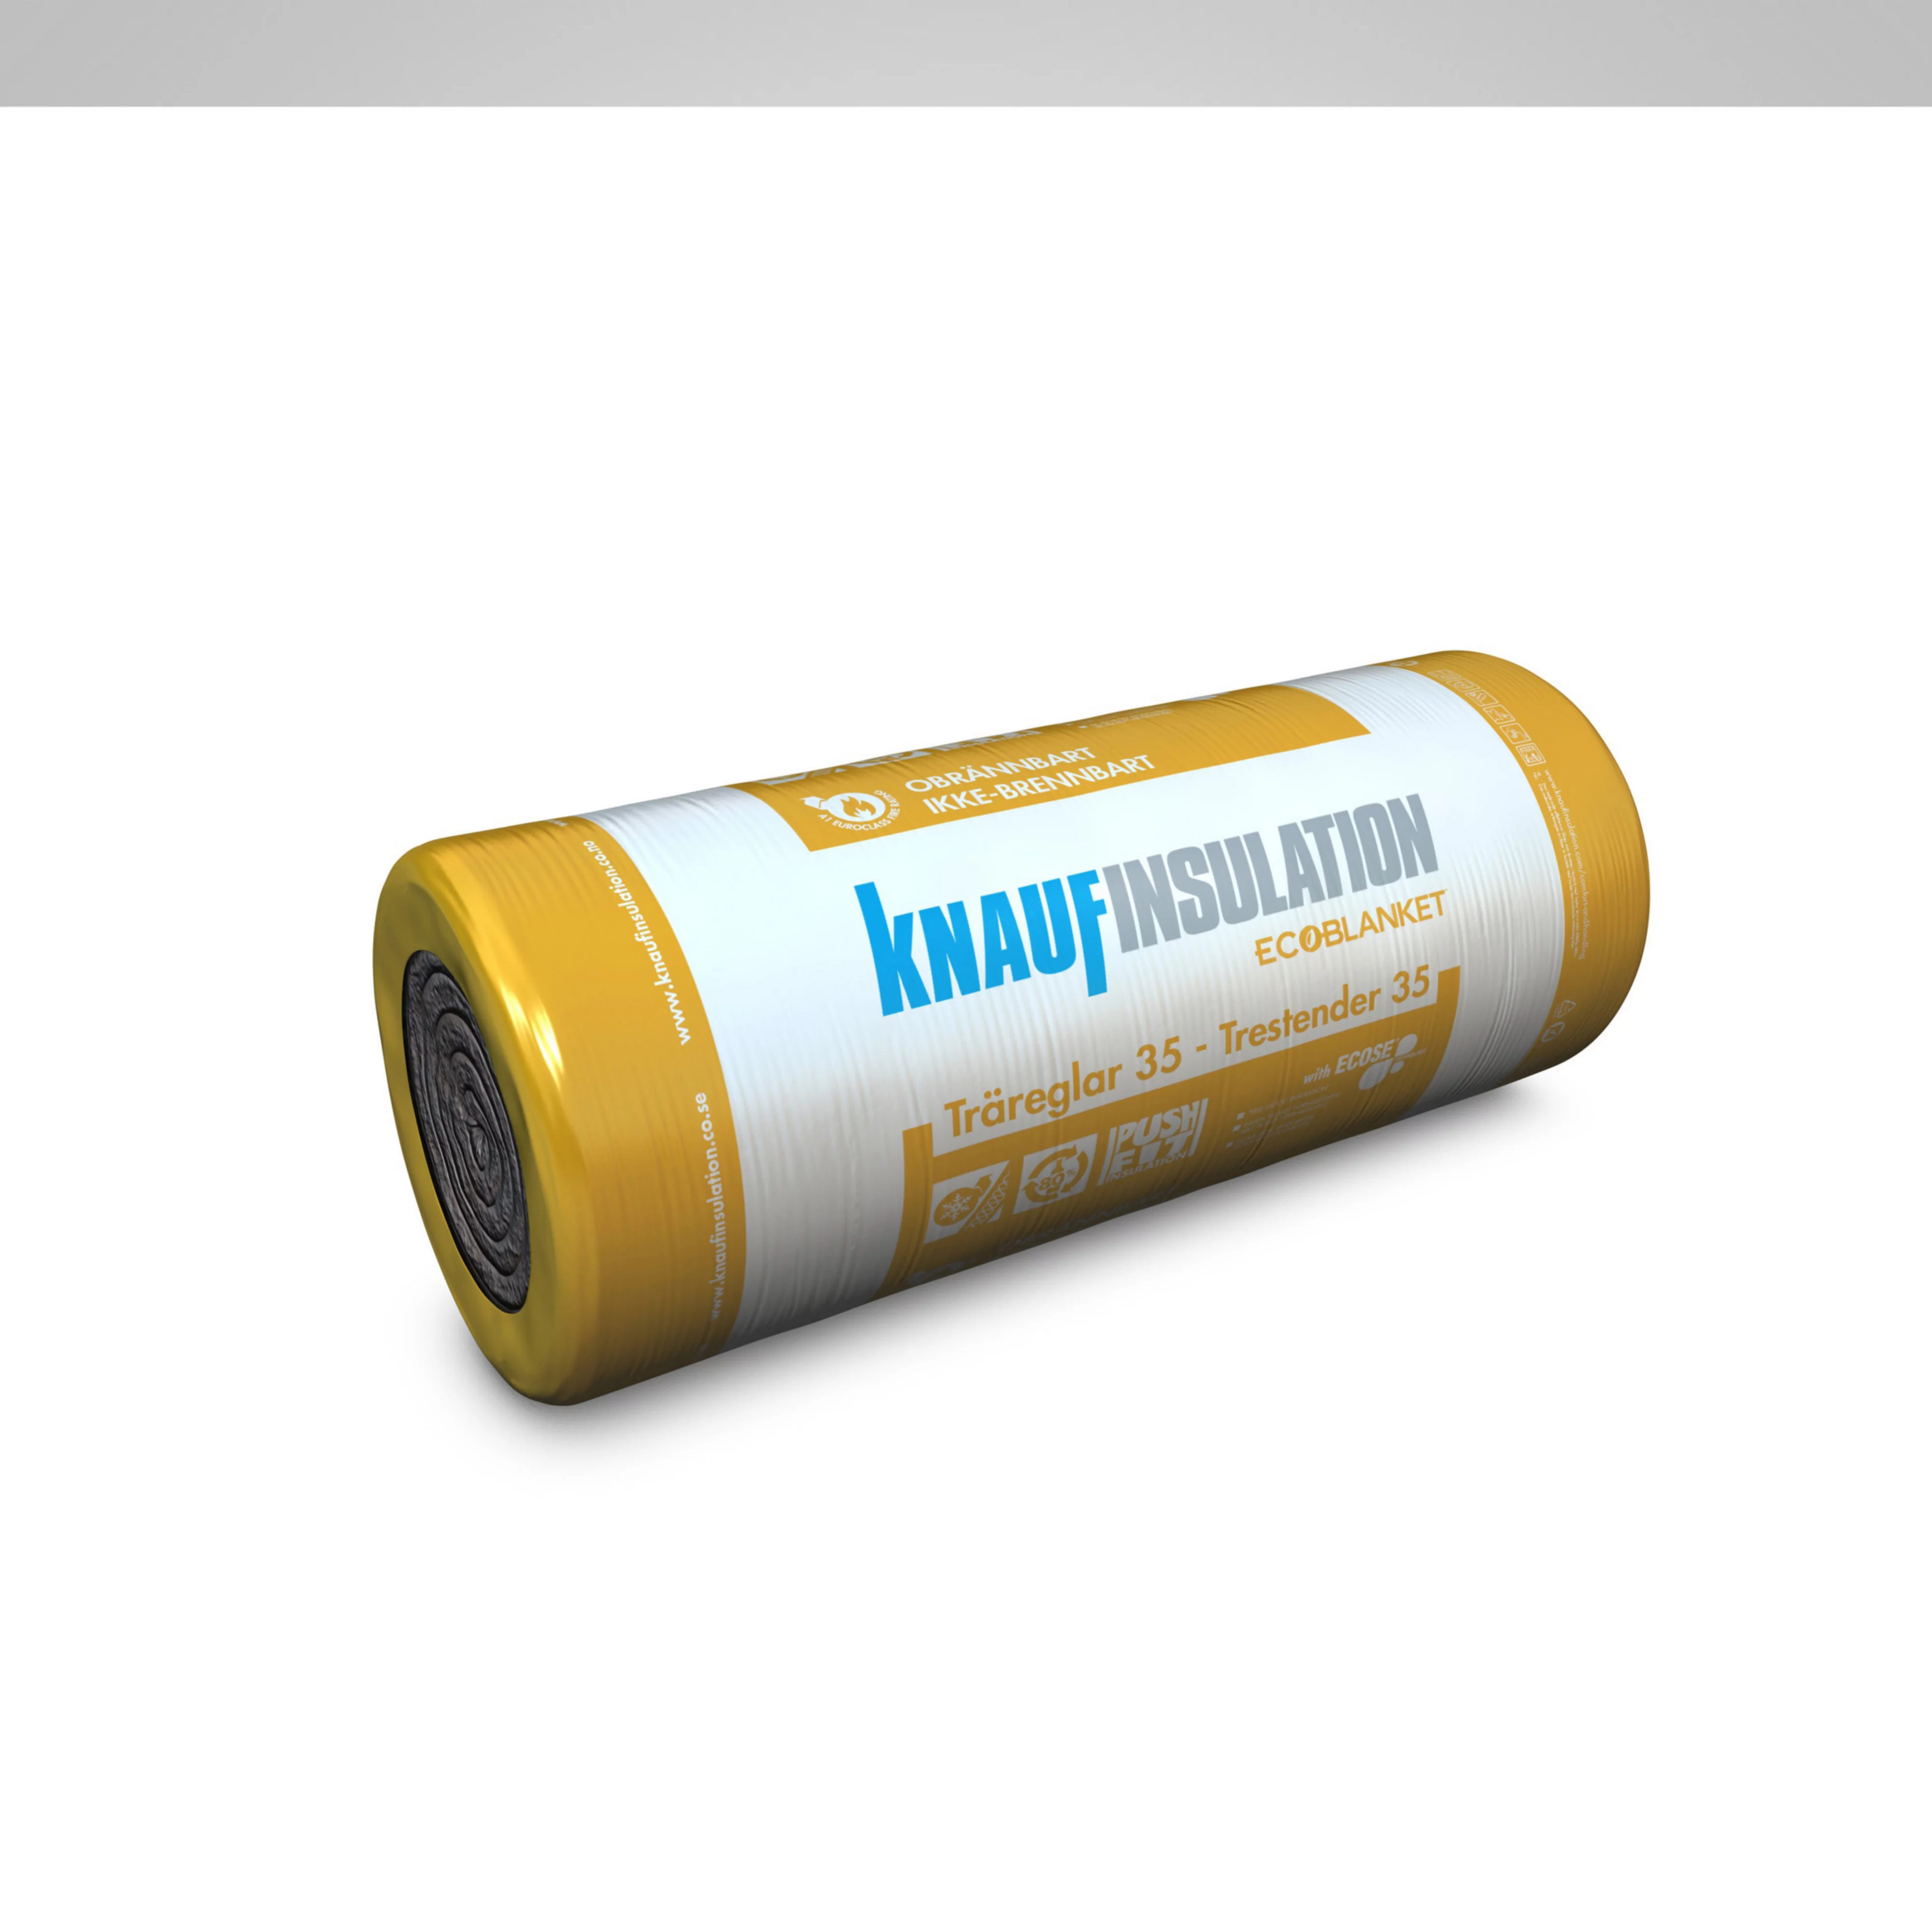 Knauf Insulation Timber Roll 35 2-Packaging-SCAN